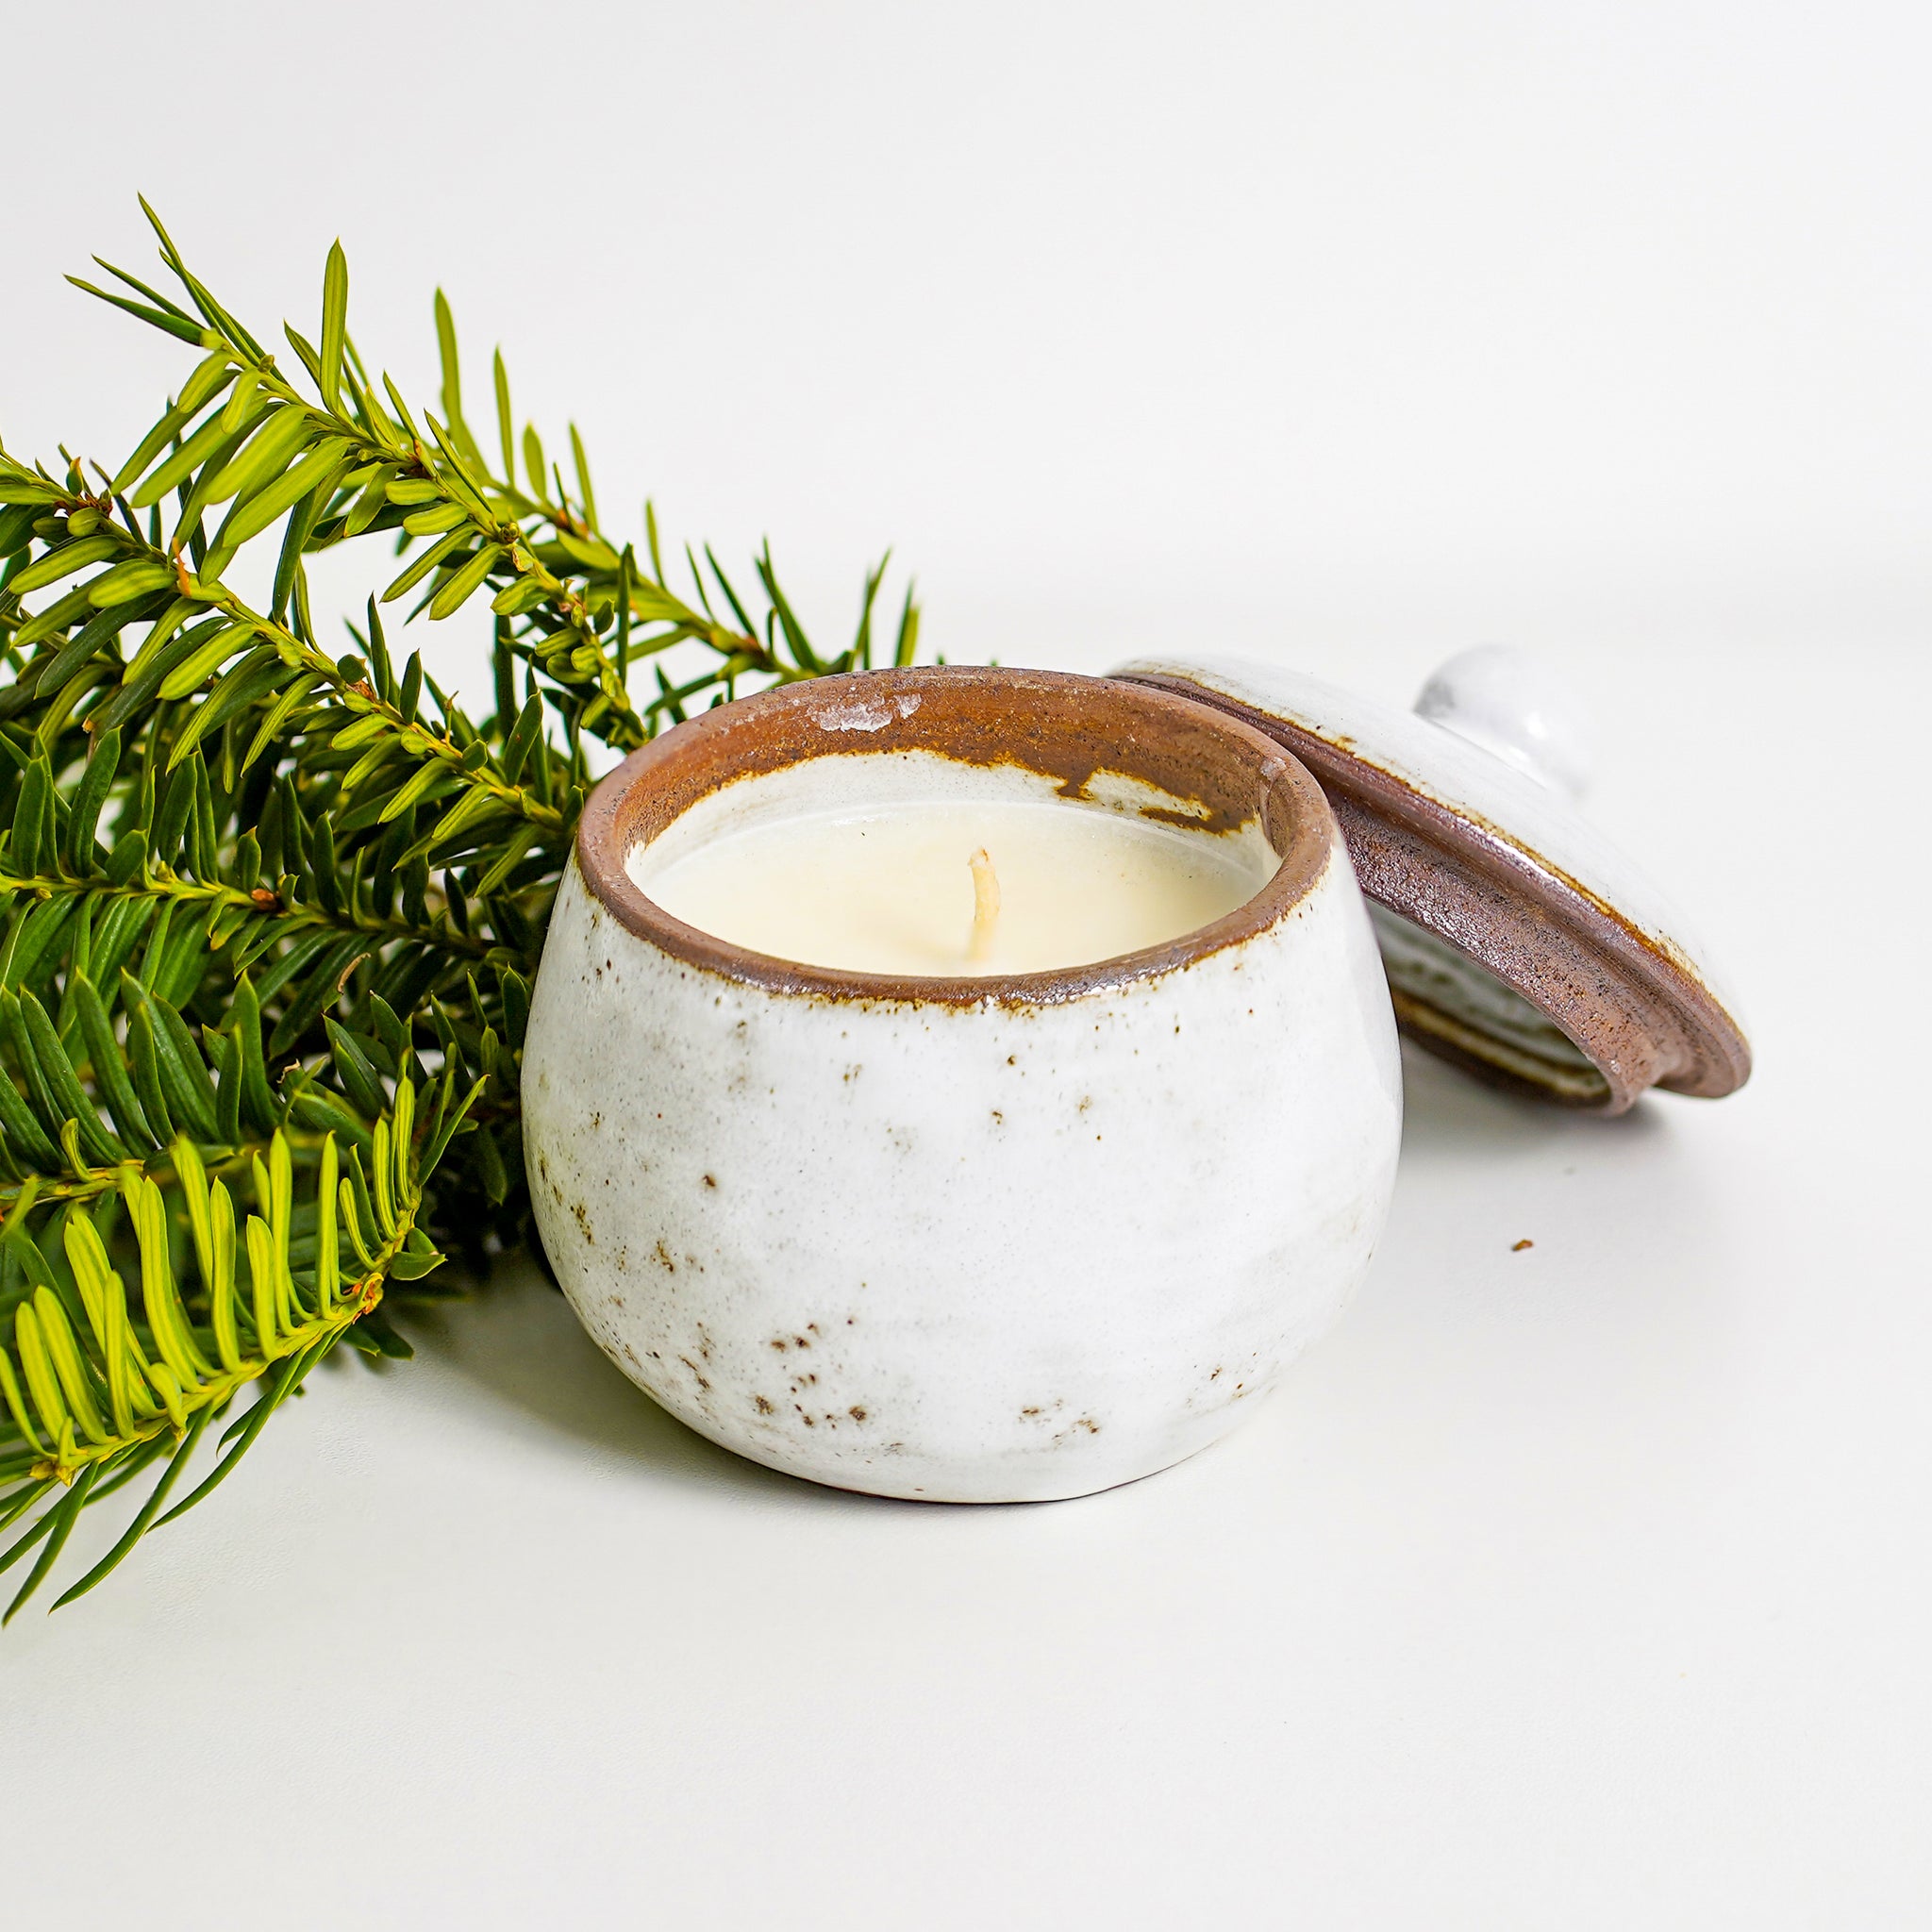 Experience a sense of calmness and clarity with our natural soy wax ceramic candles in three distinct scents: cinnamon, lemongrass & lime, and English pear & Freesia. Every ceramic vessel is one-of-a-kind, detailed with varying shades of glaze to make each piece even more special.